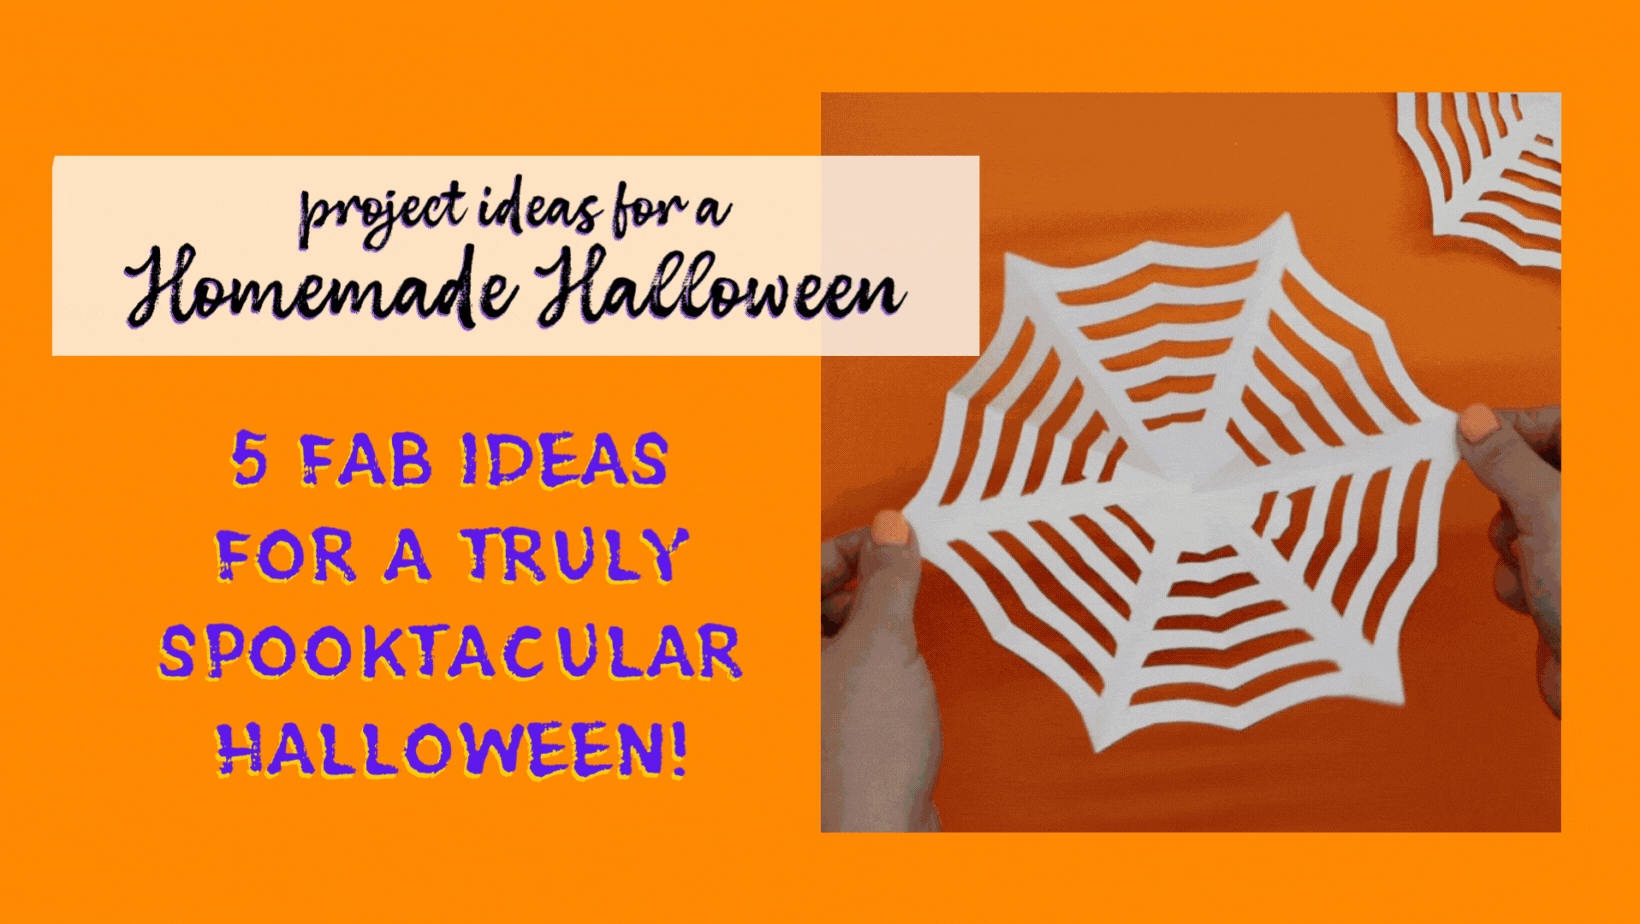 Let's Make a Wire Spiderweb for Halloween - The Magic Onions